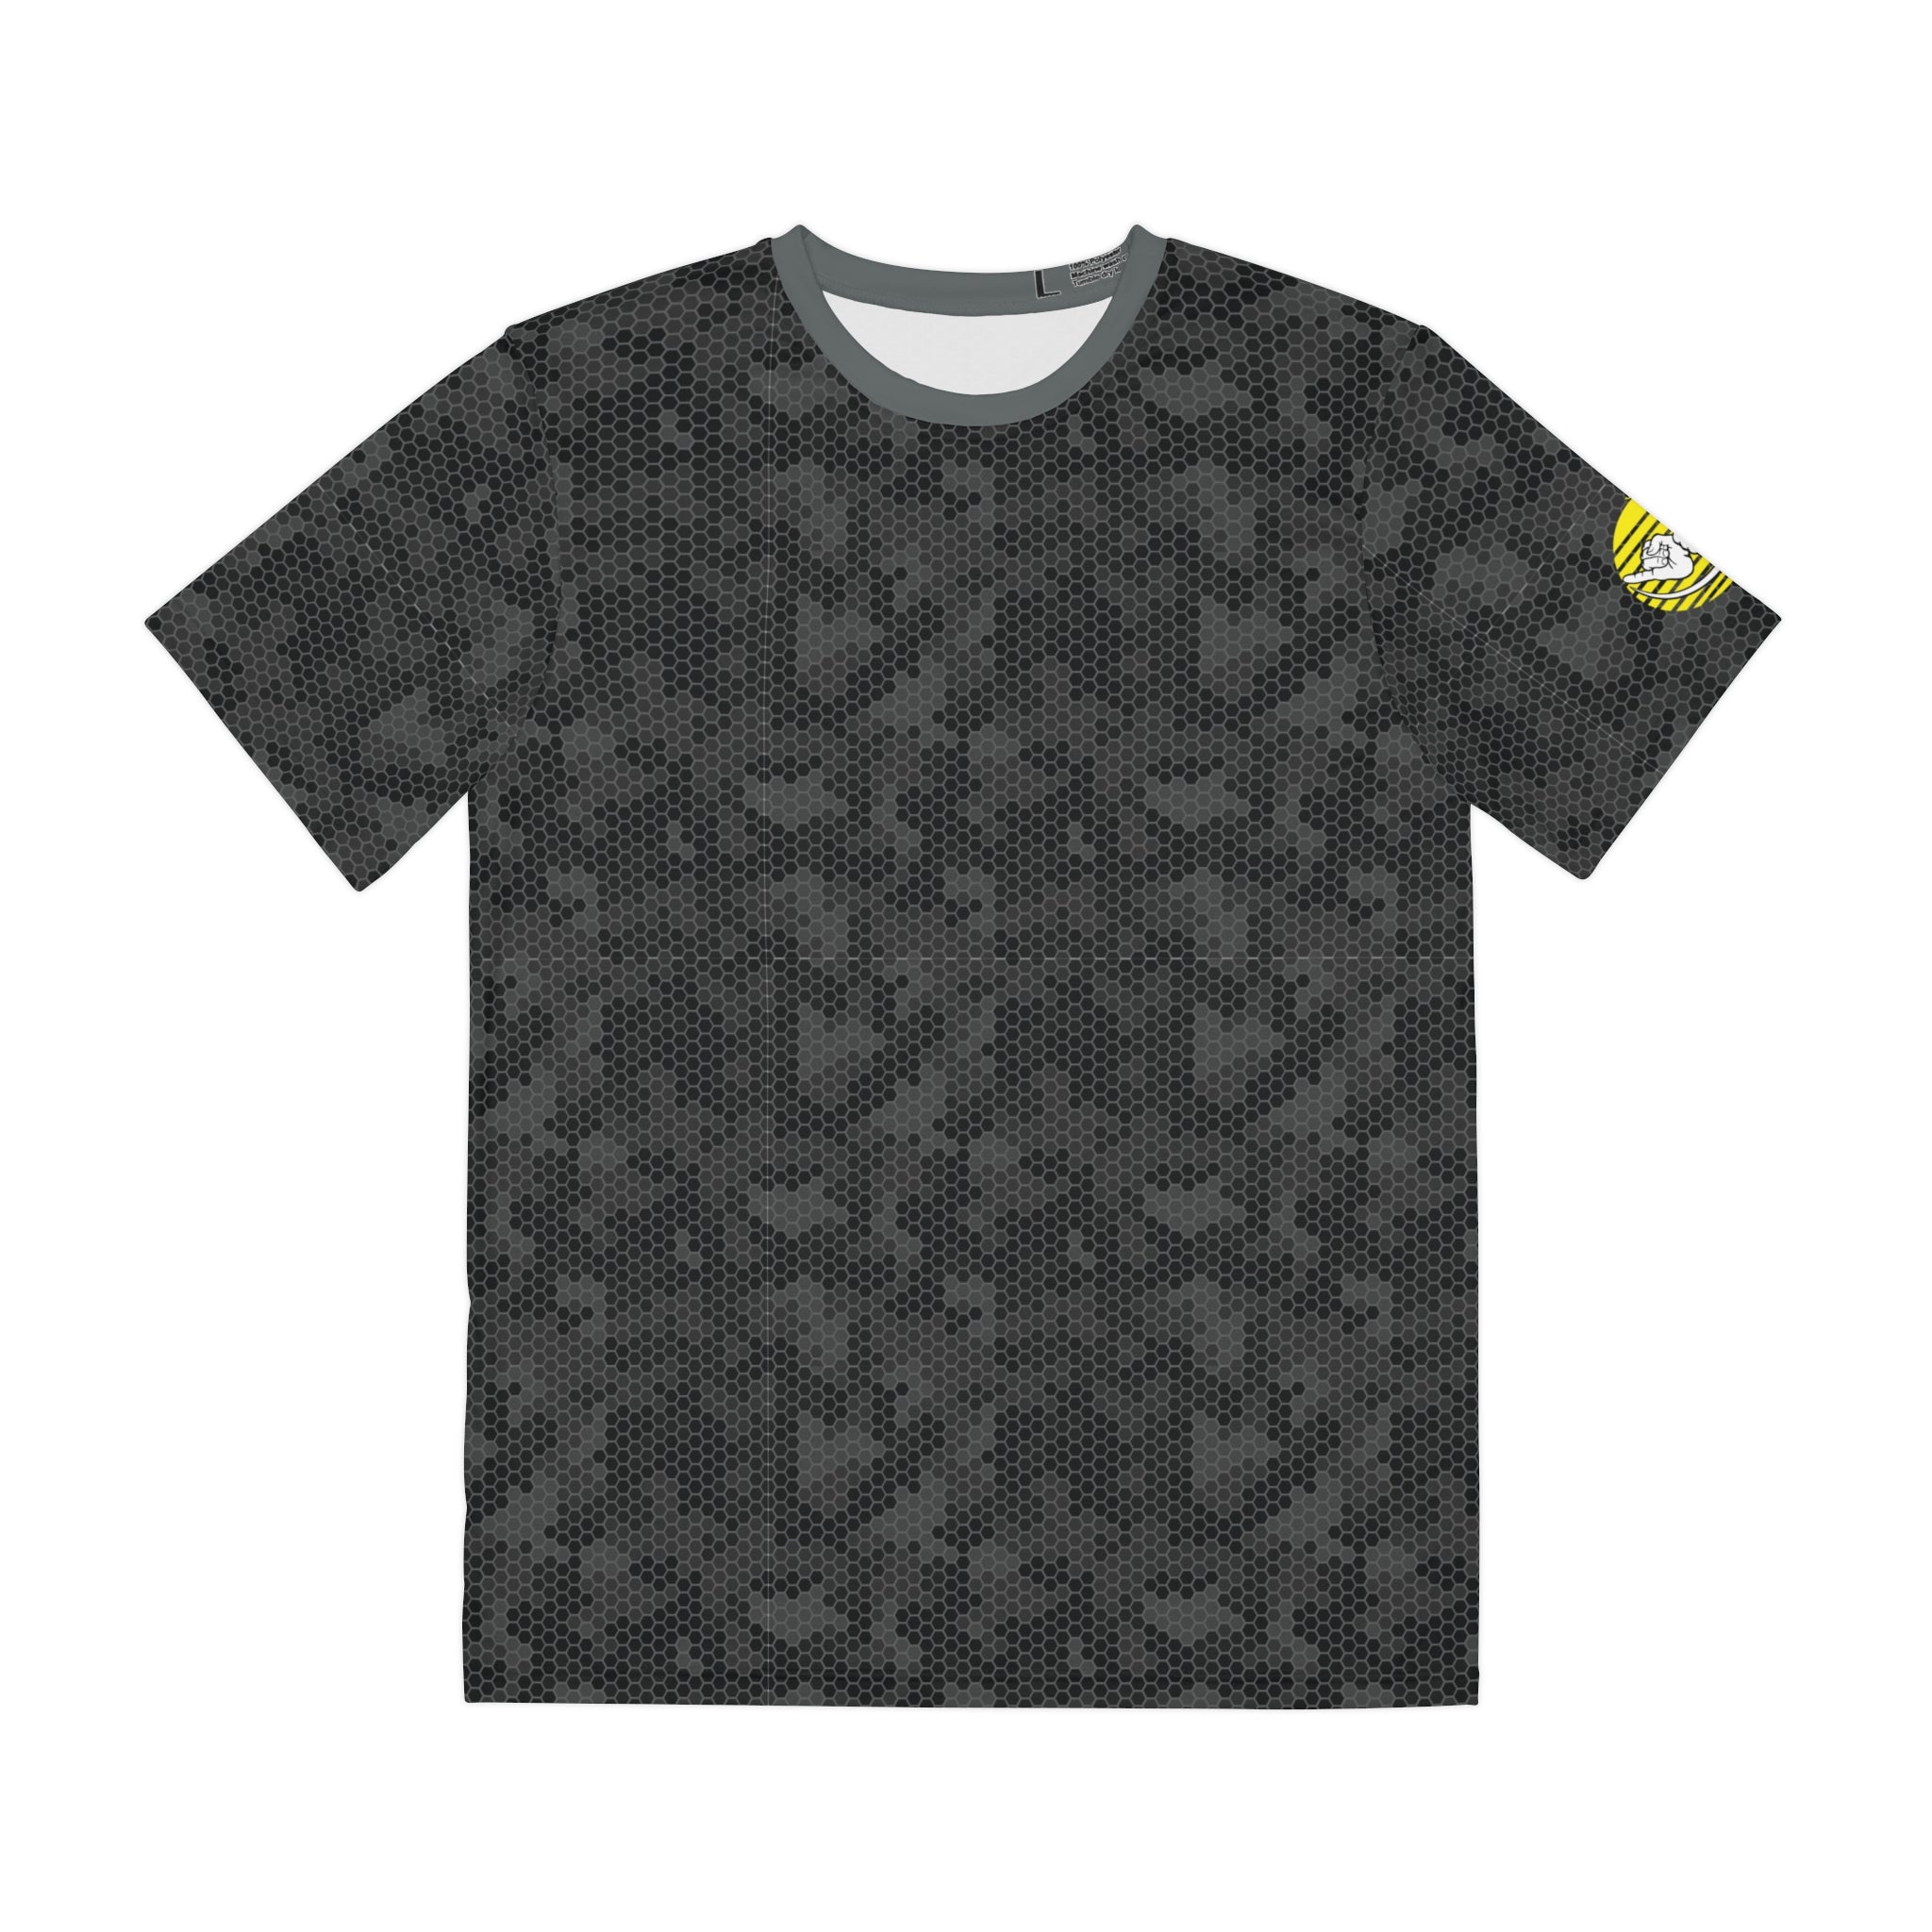 Jersey Discs Black Camo Sublimation Men's Polyester Tee